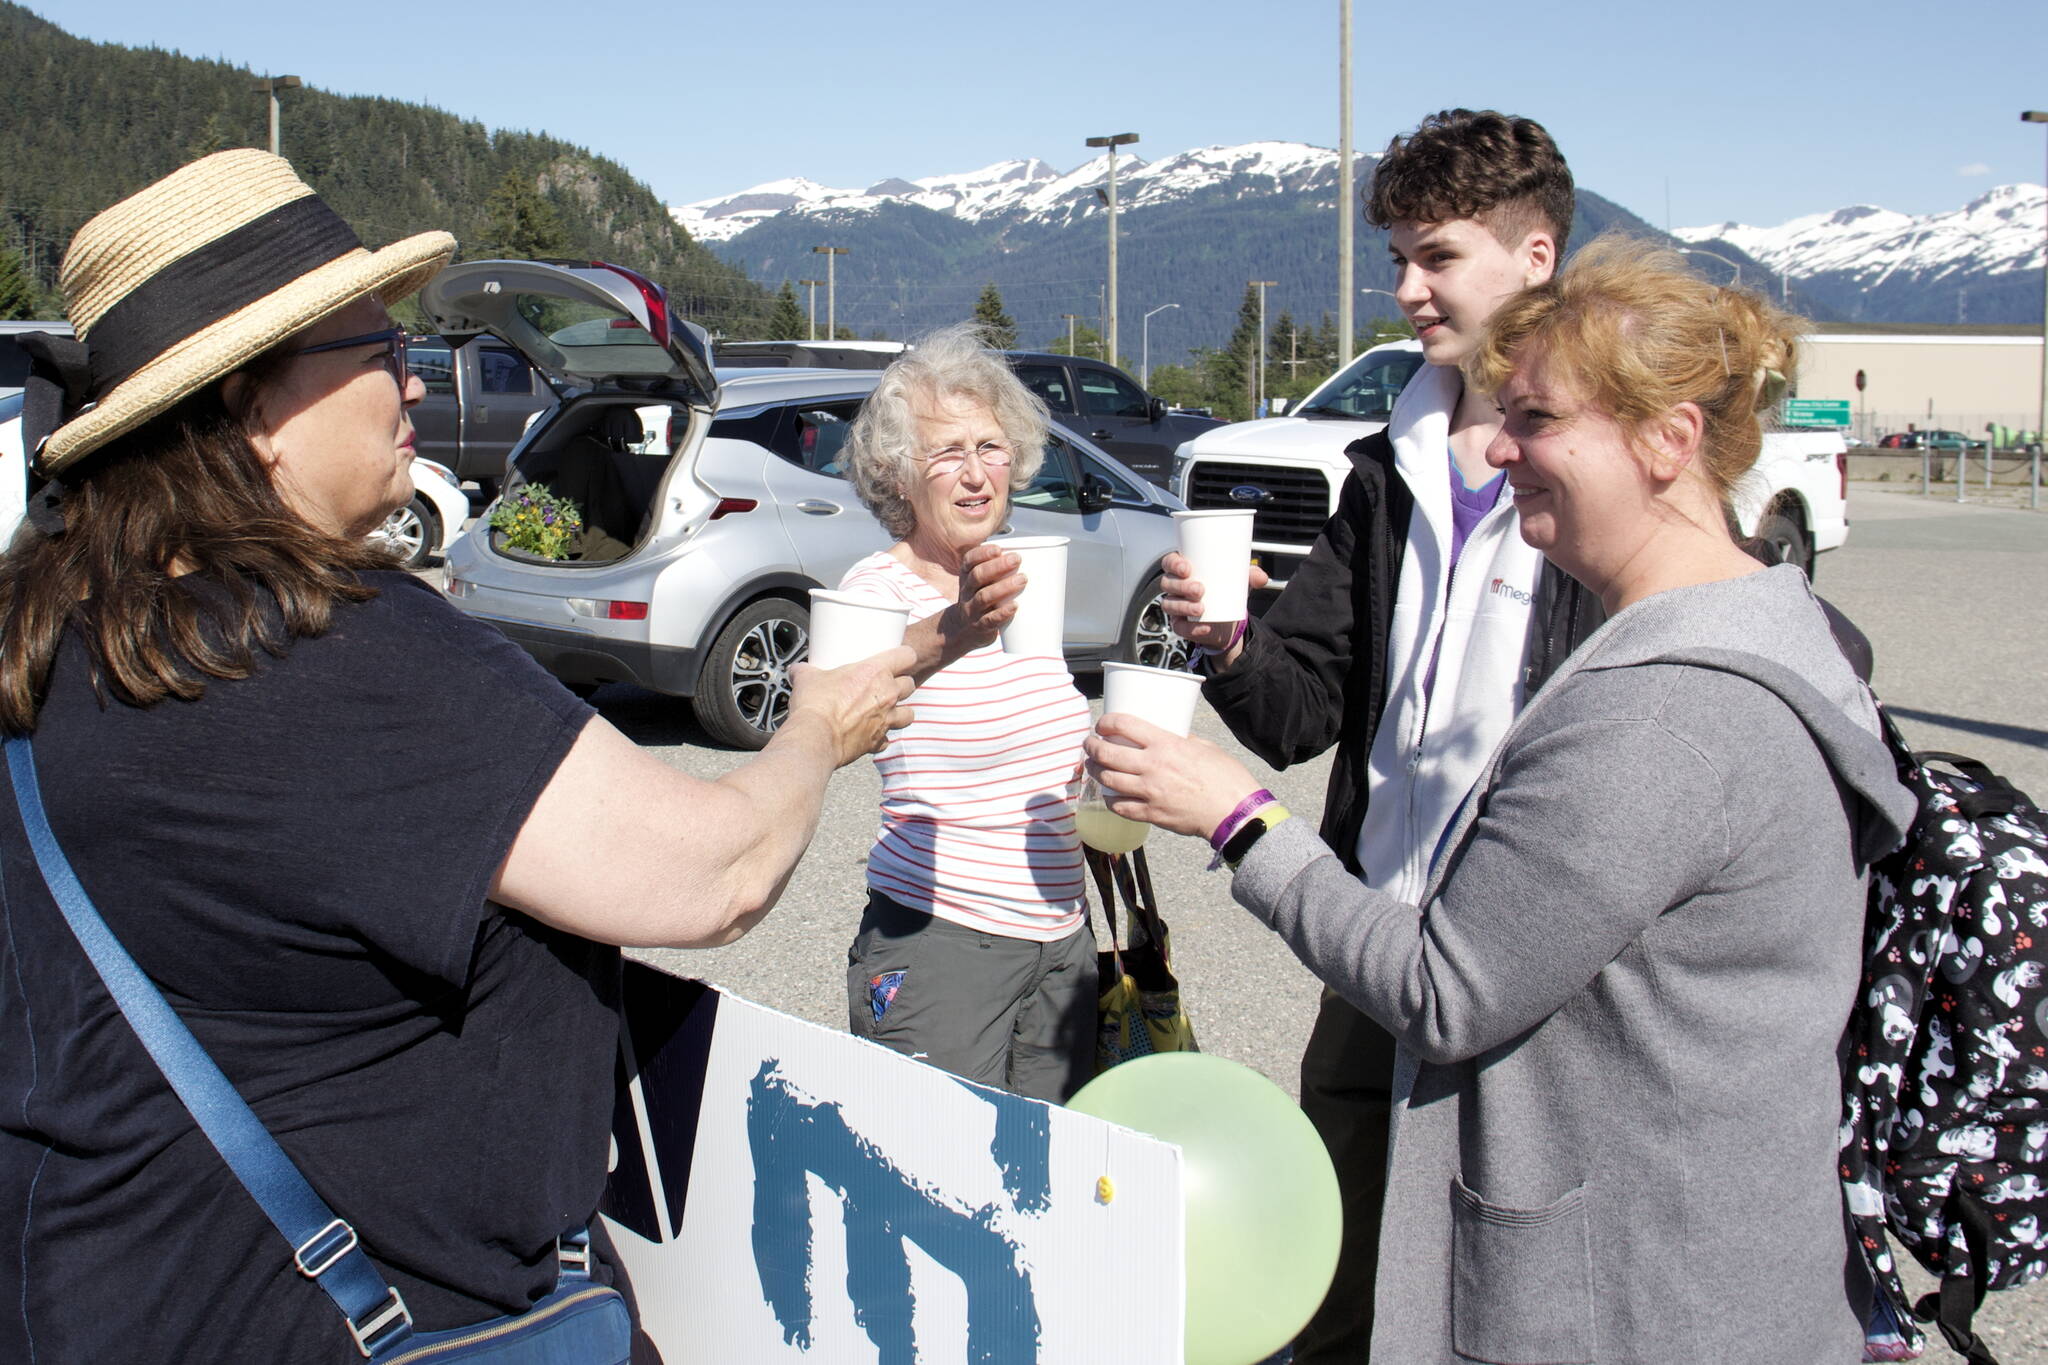 Iryna Hrynchenko and her 18 year old son, Ivan Hrynchenko, 18, Joyanne Bloom and Bridget Smith toast to the Ukrainians’ arrival Saturday at Juneau Airport. Bloom and Smith are part of a five-person group of residents who raised funds to bring the Hrynchenkos to Juneau, and is helping them with housing, education and job opportunities, and in other ways. (Mark Sabbatini / Juneau Empire)